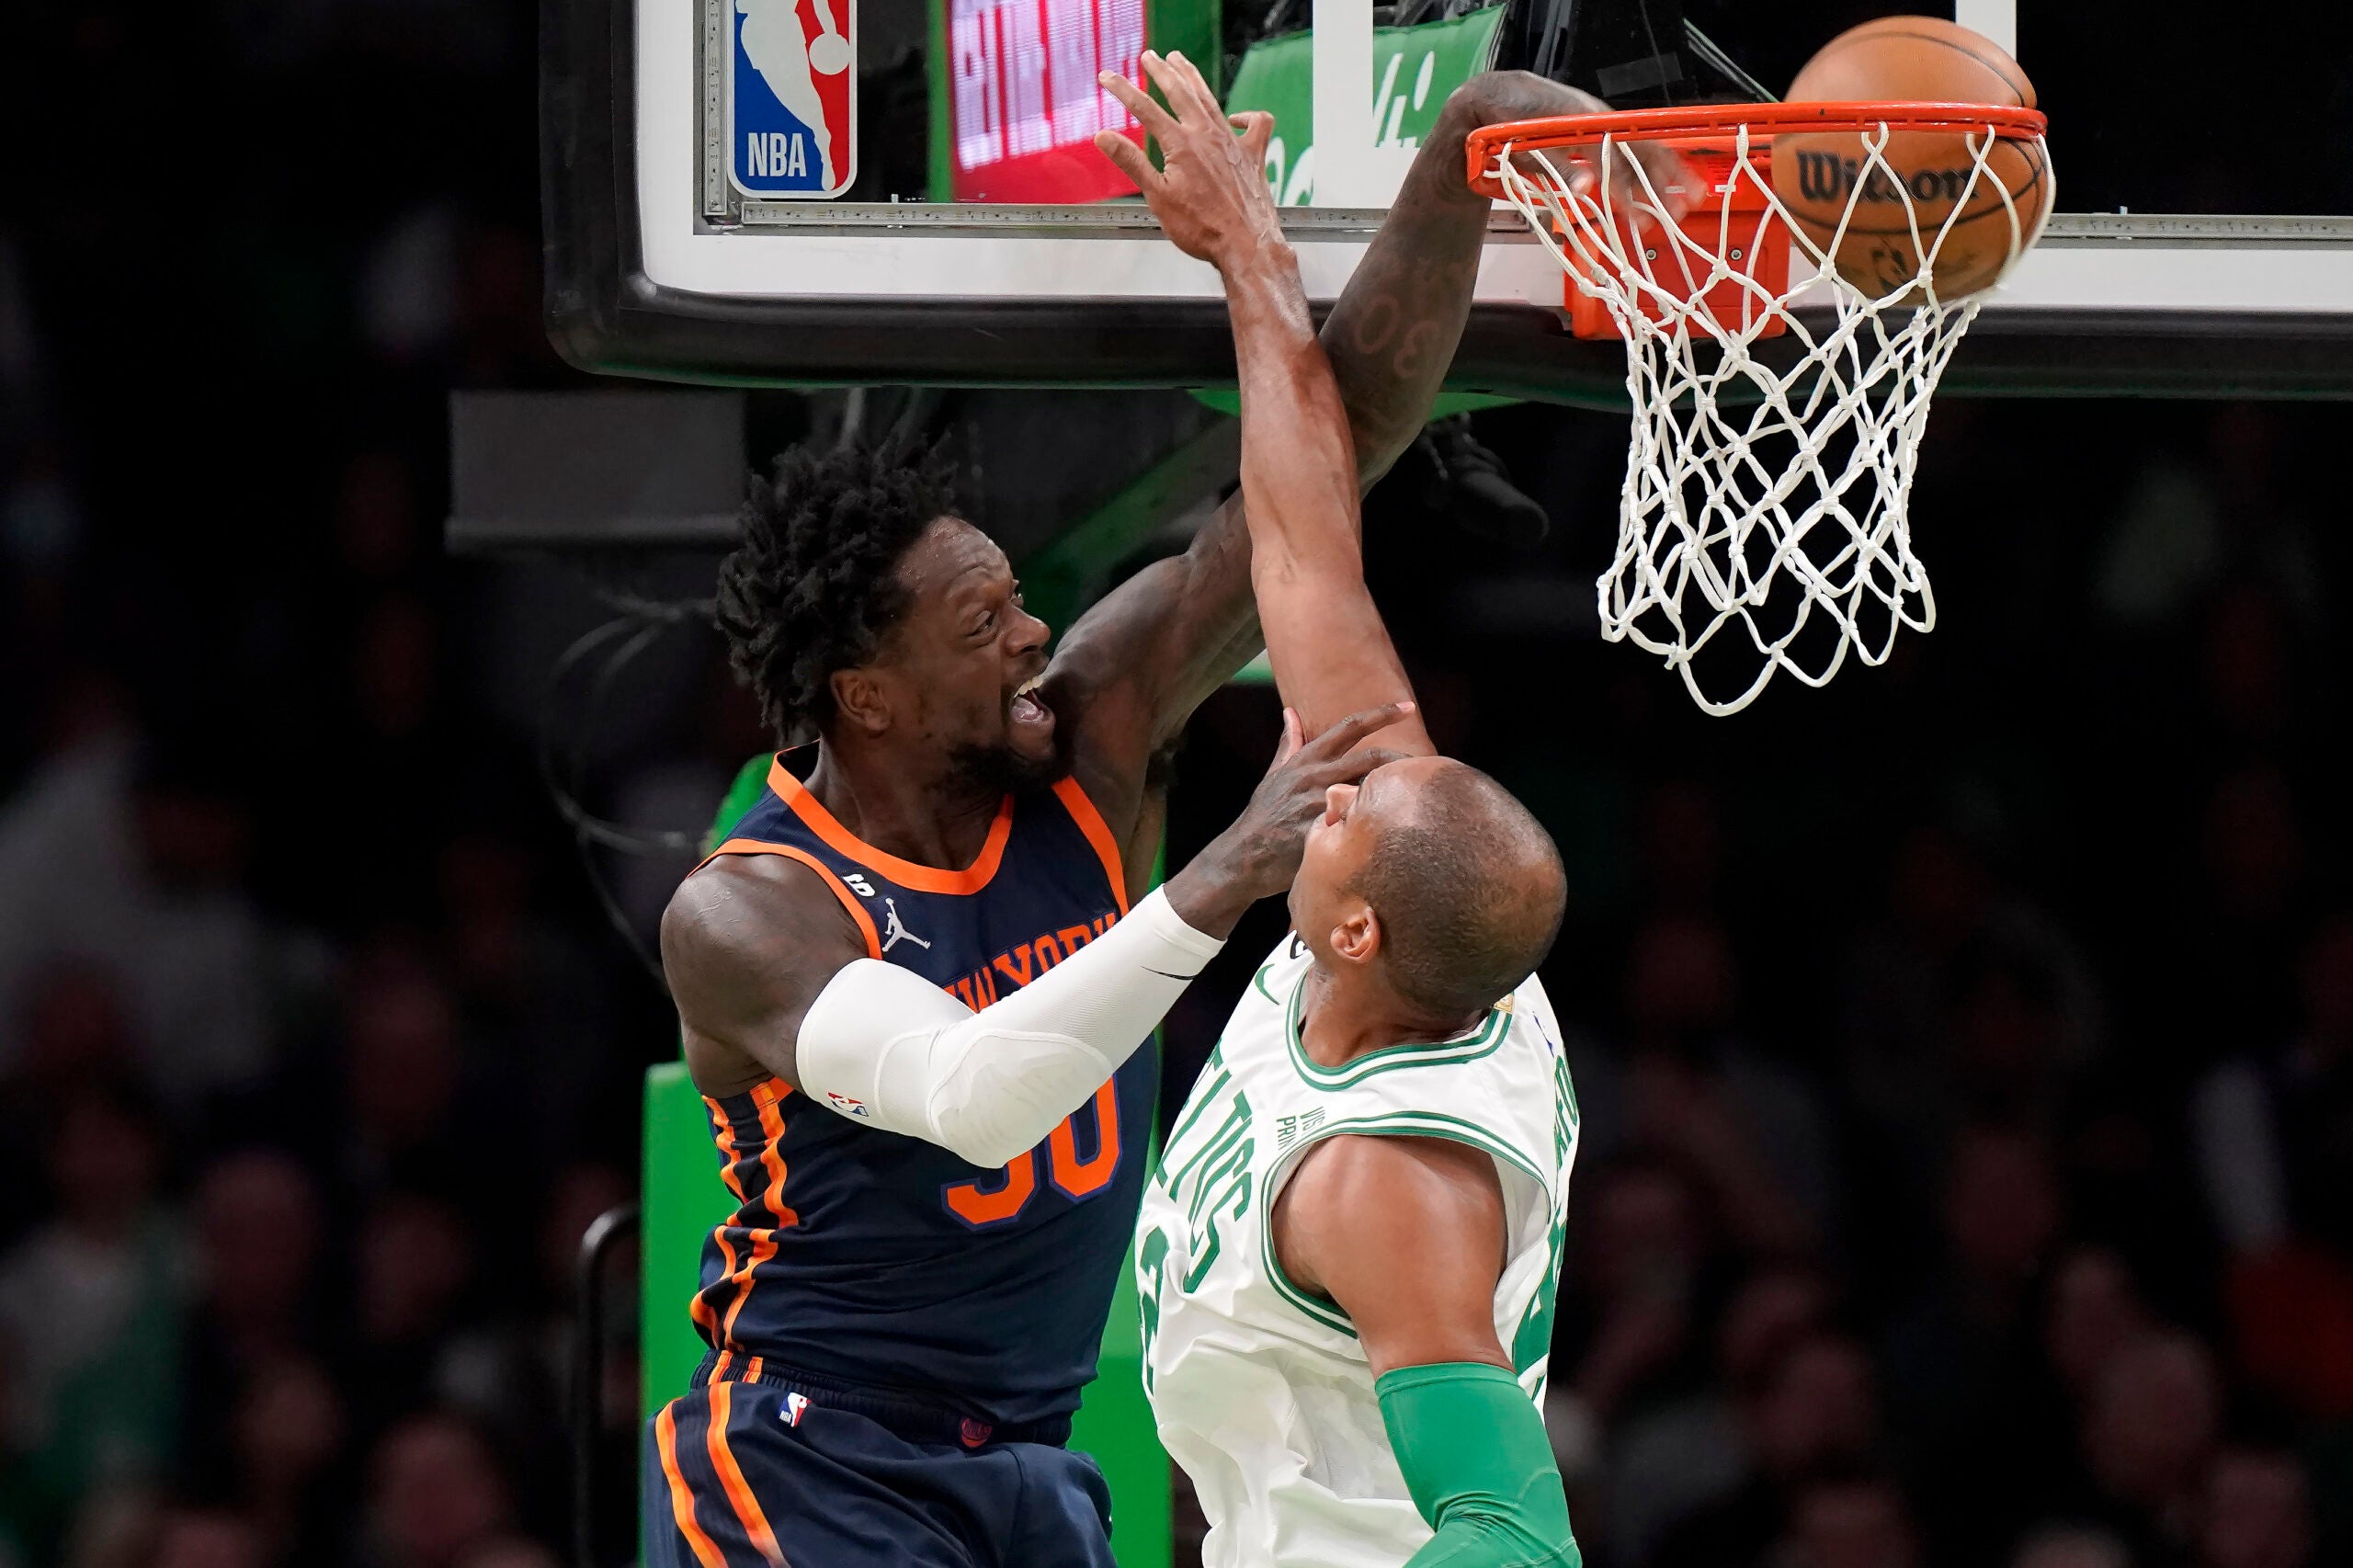 Knicks forward Julius Randle drives to the basket to score as Al Horford defends during the first half.